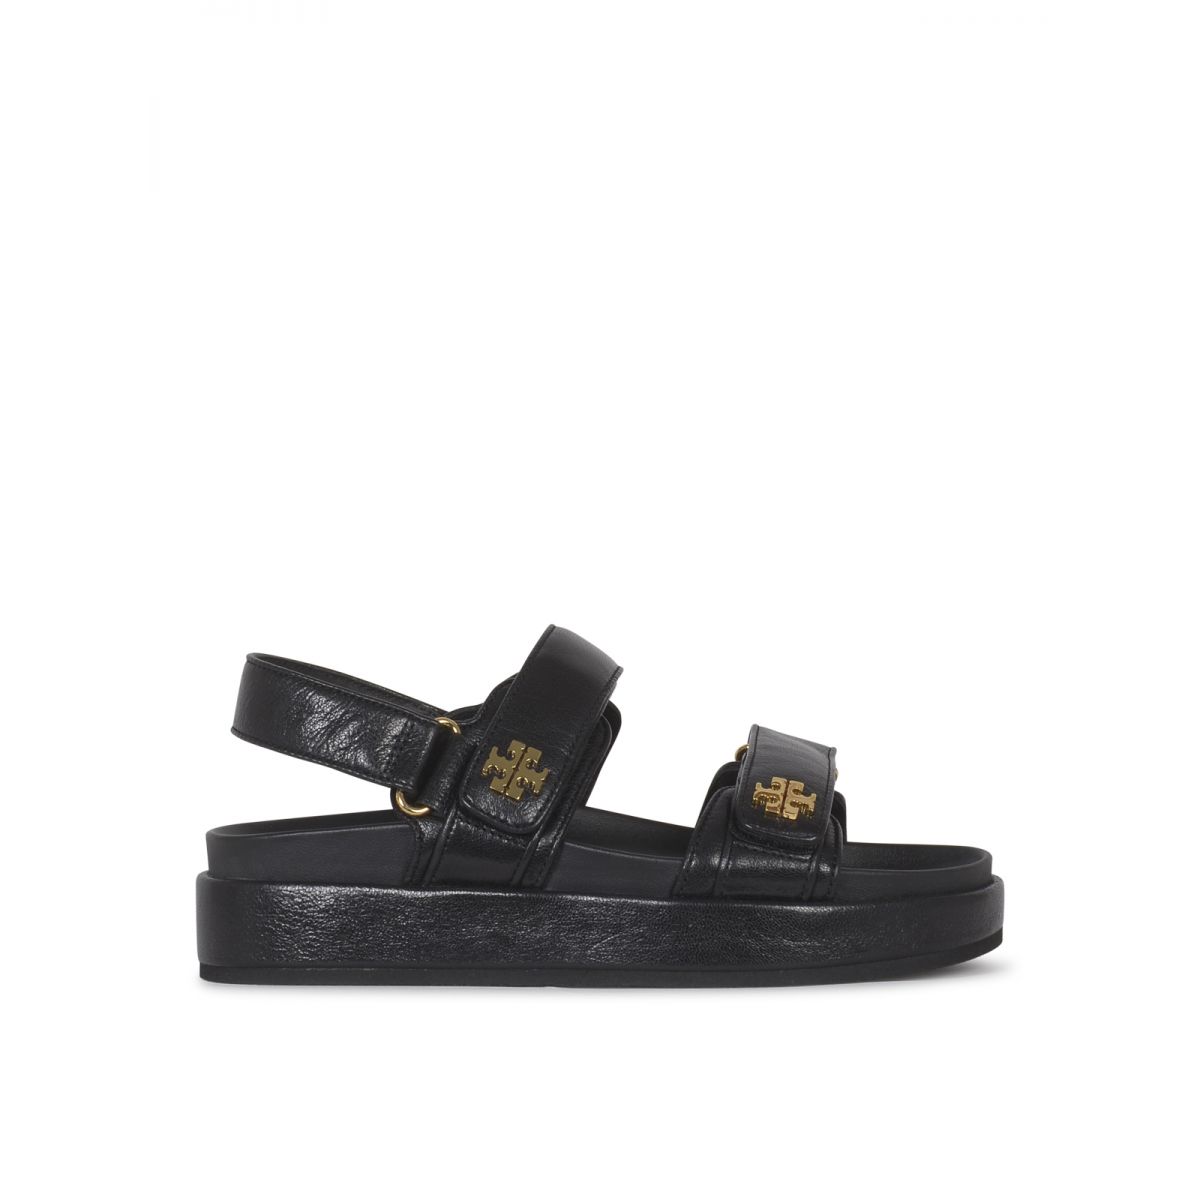 TORY BURCH - Double T-motif leather sandals